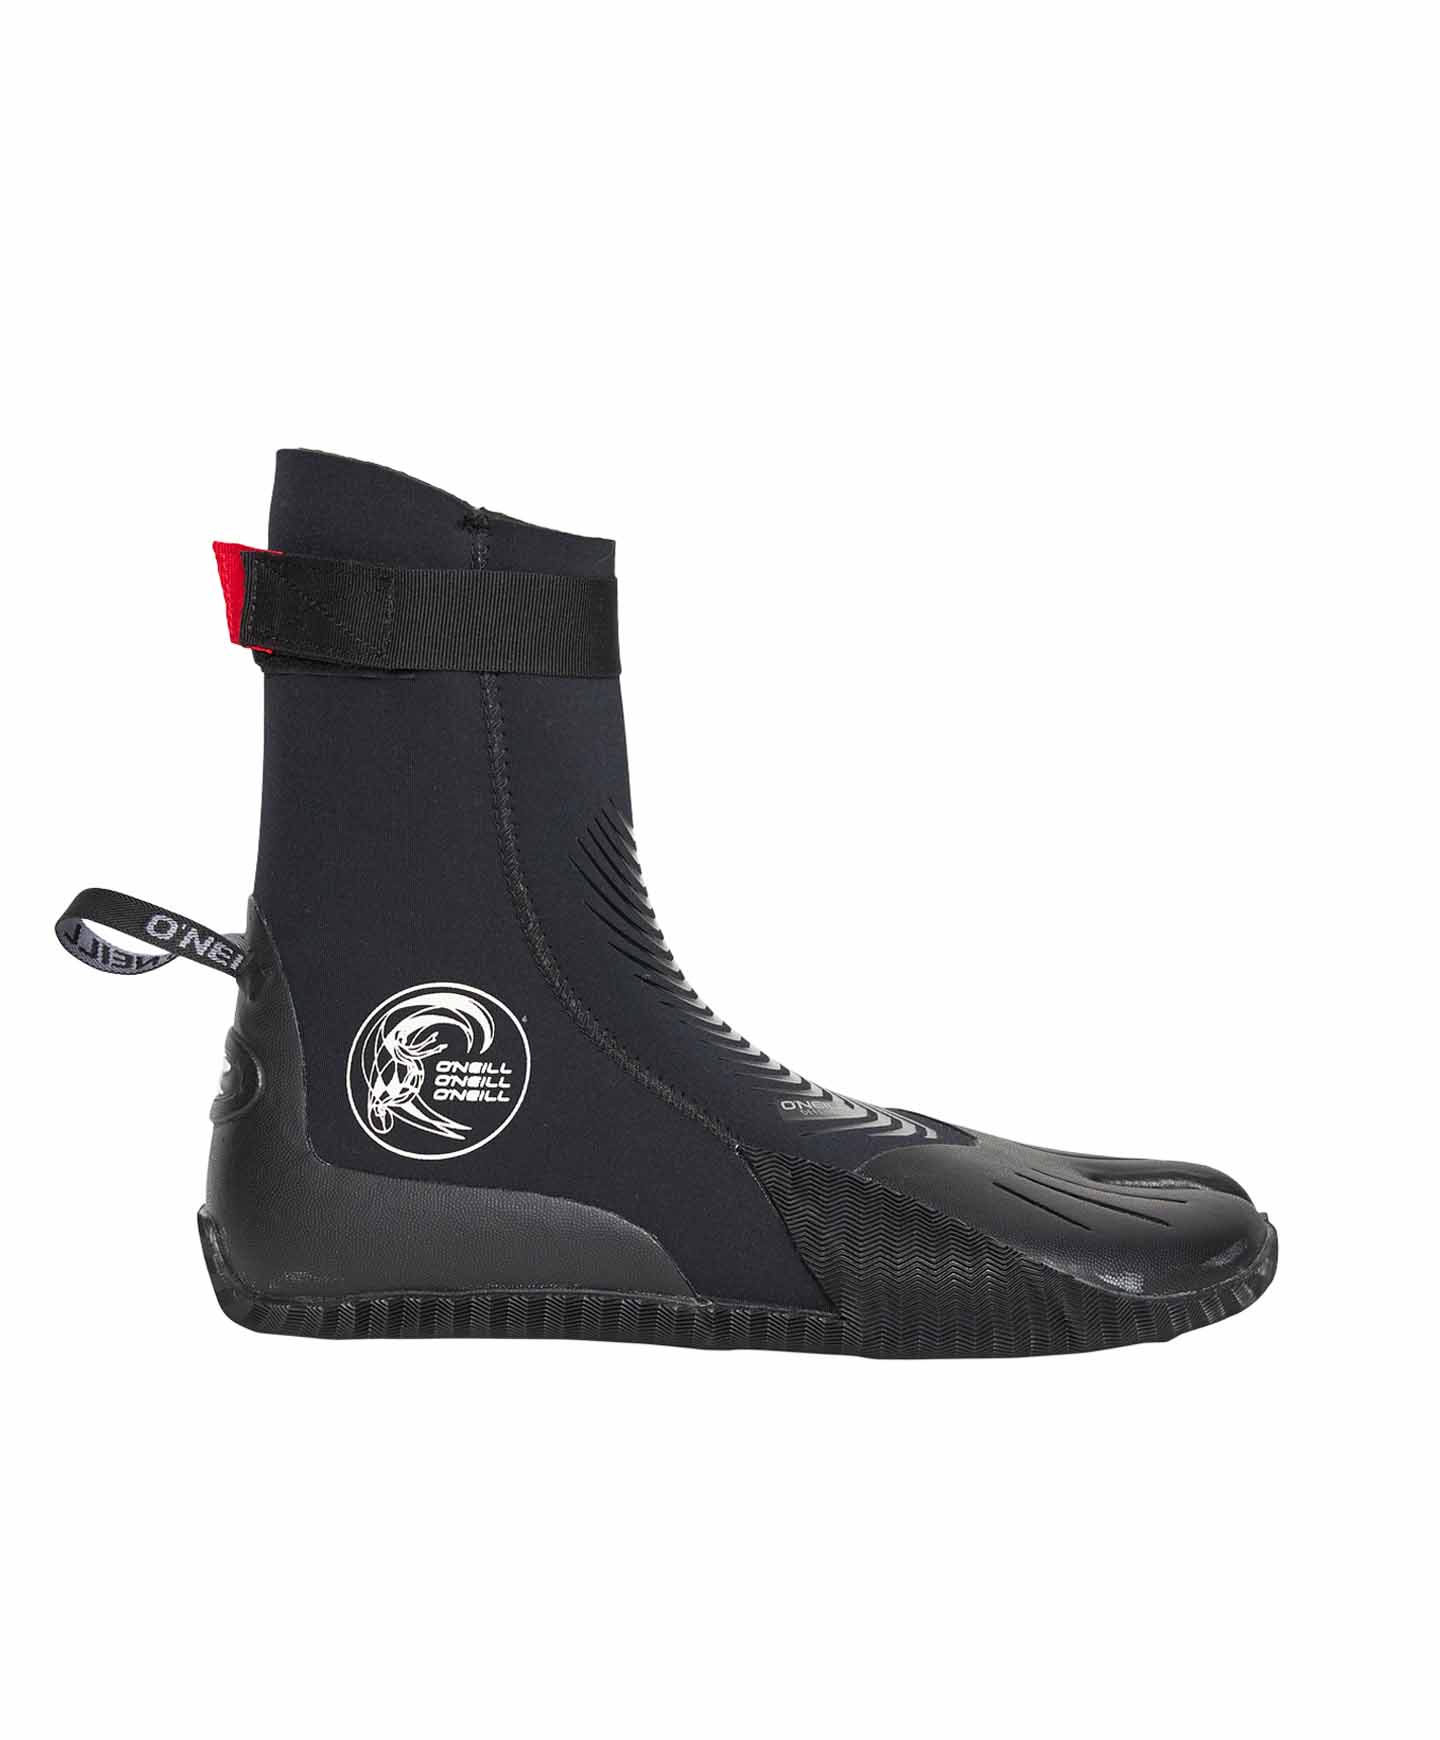 O'Neill Defender ST Surfing Boot 3mm